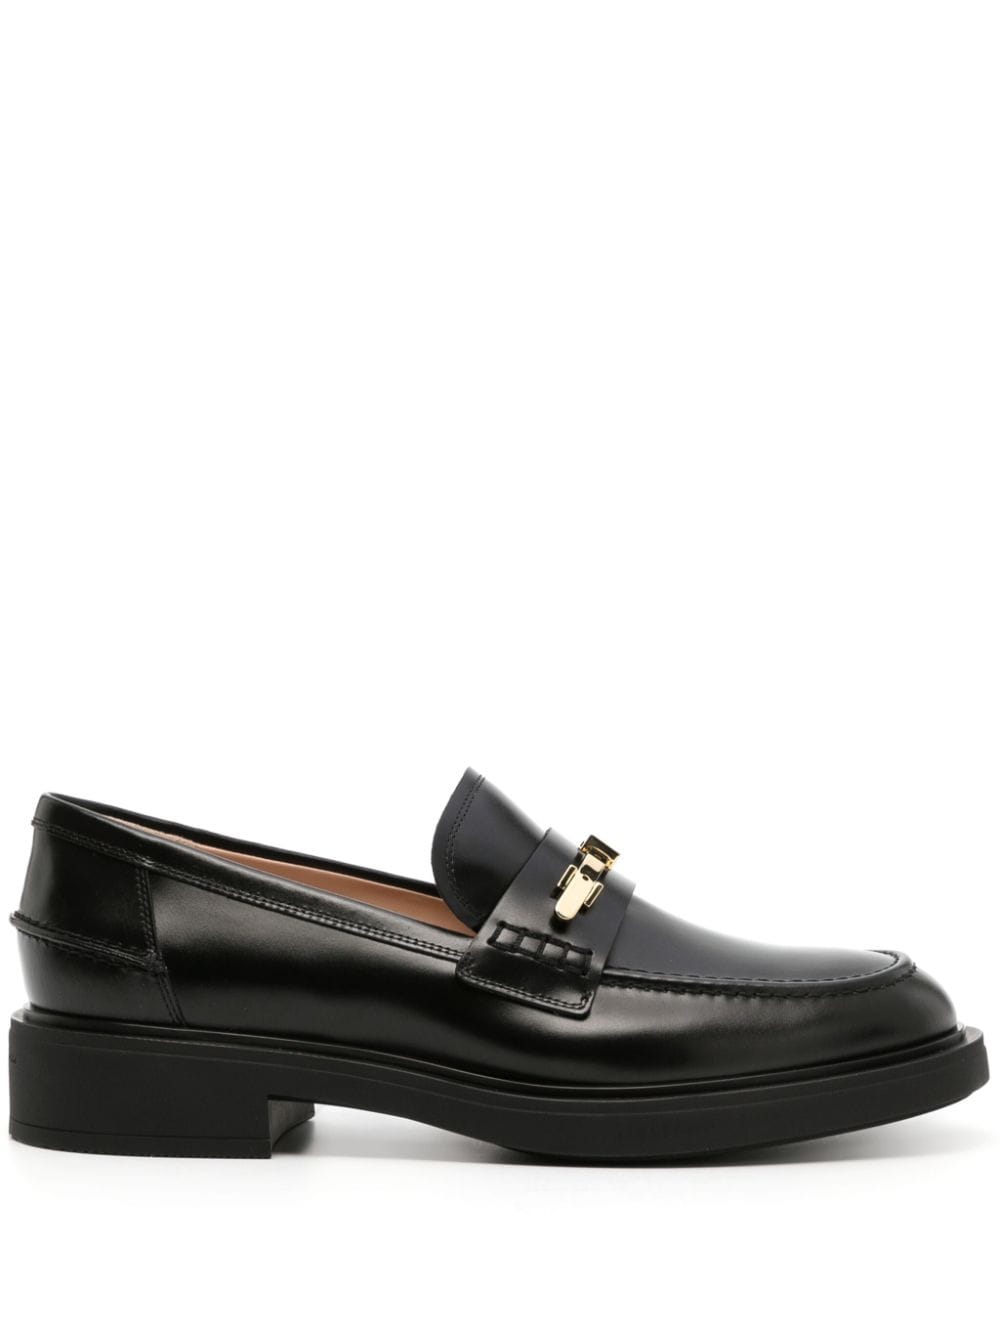 Shop Gianvito Rossi Luxurious Black Leather Loafers